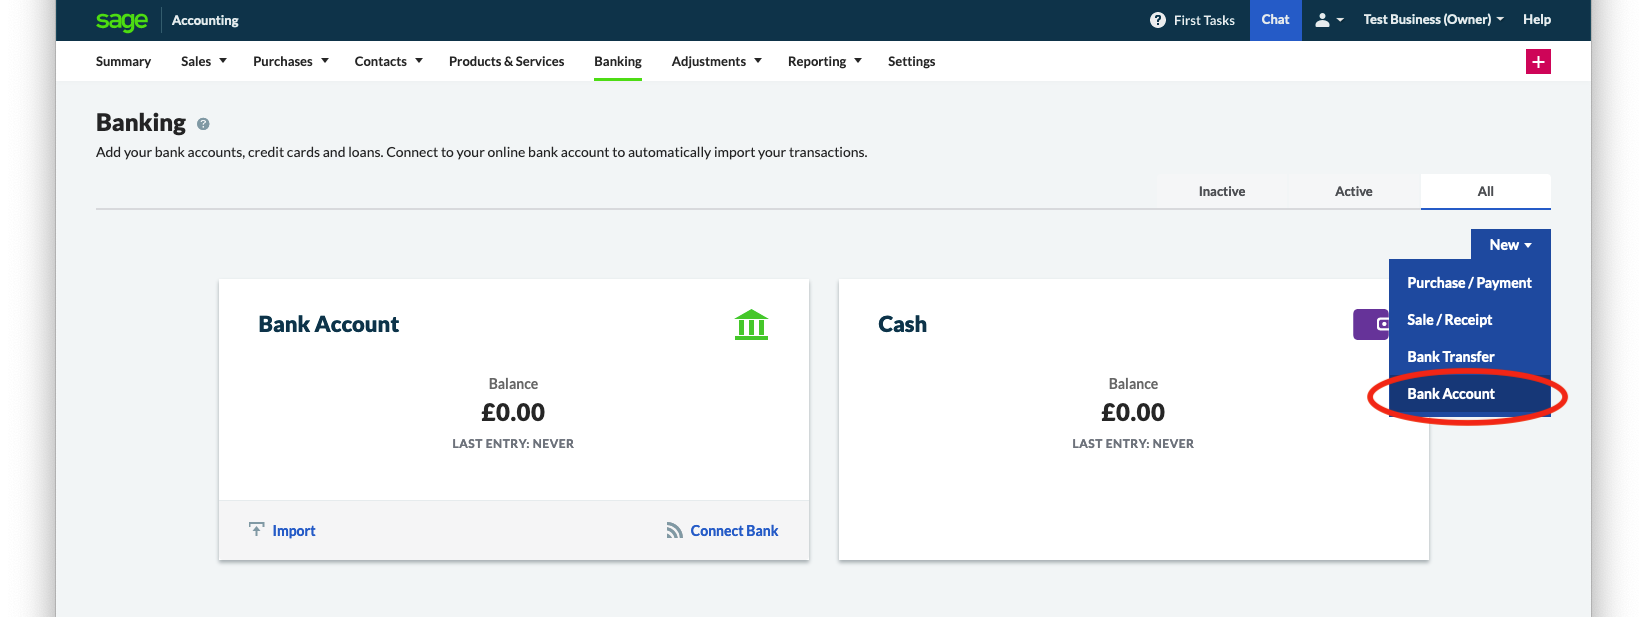 Add a bank account in Sage